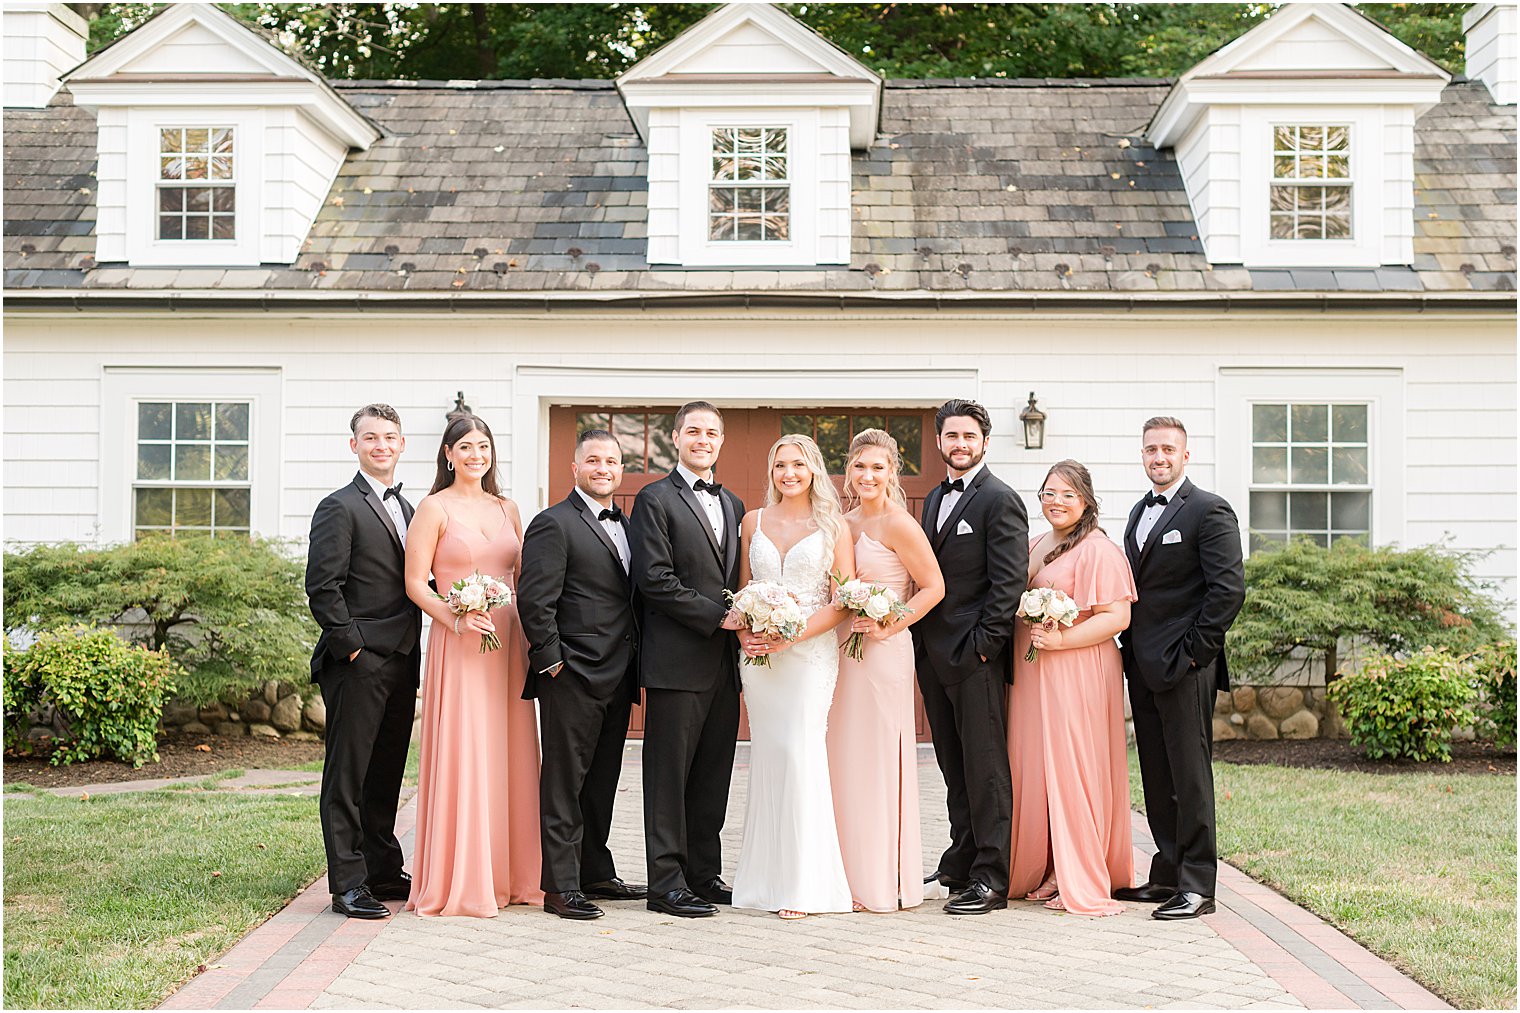 newlyweds pose with wedding party in pink and black attire